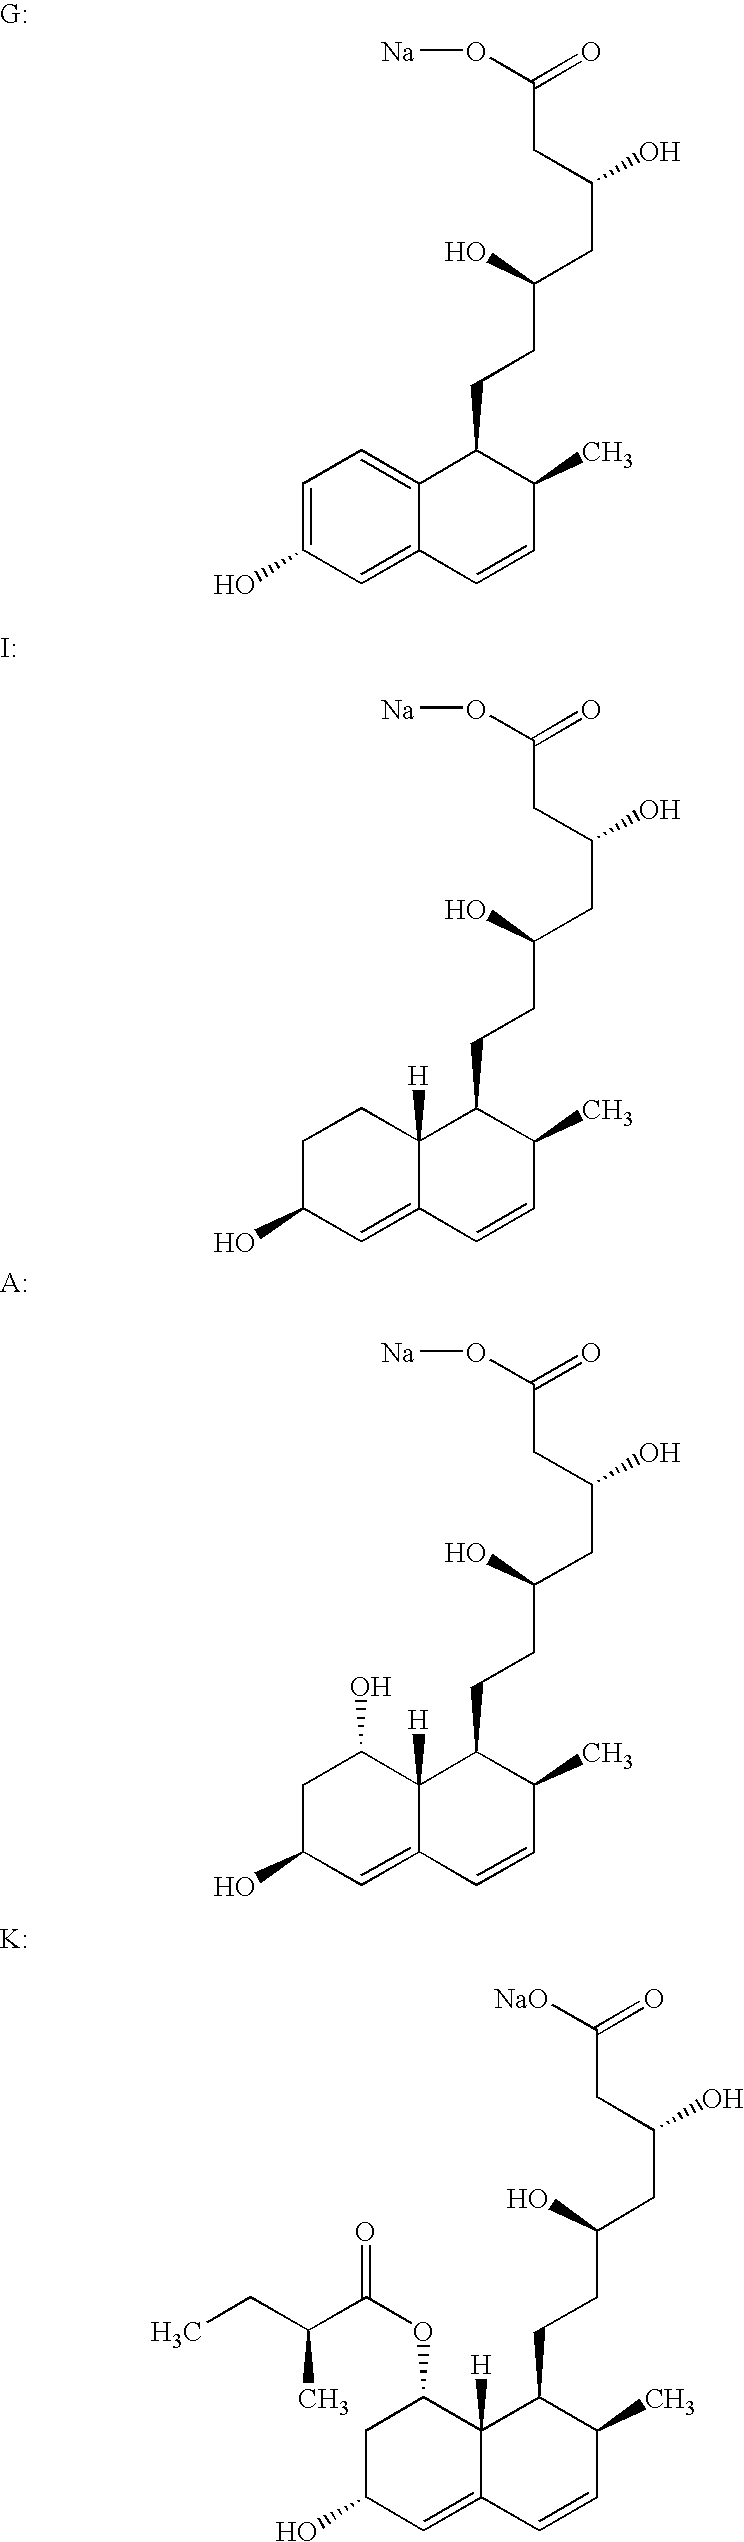 Process for obtaining HMG-CoA reductase inhibitors of high purity